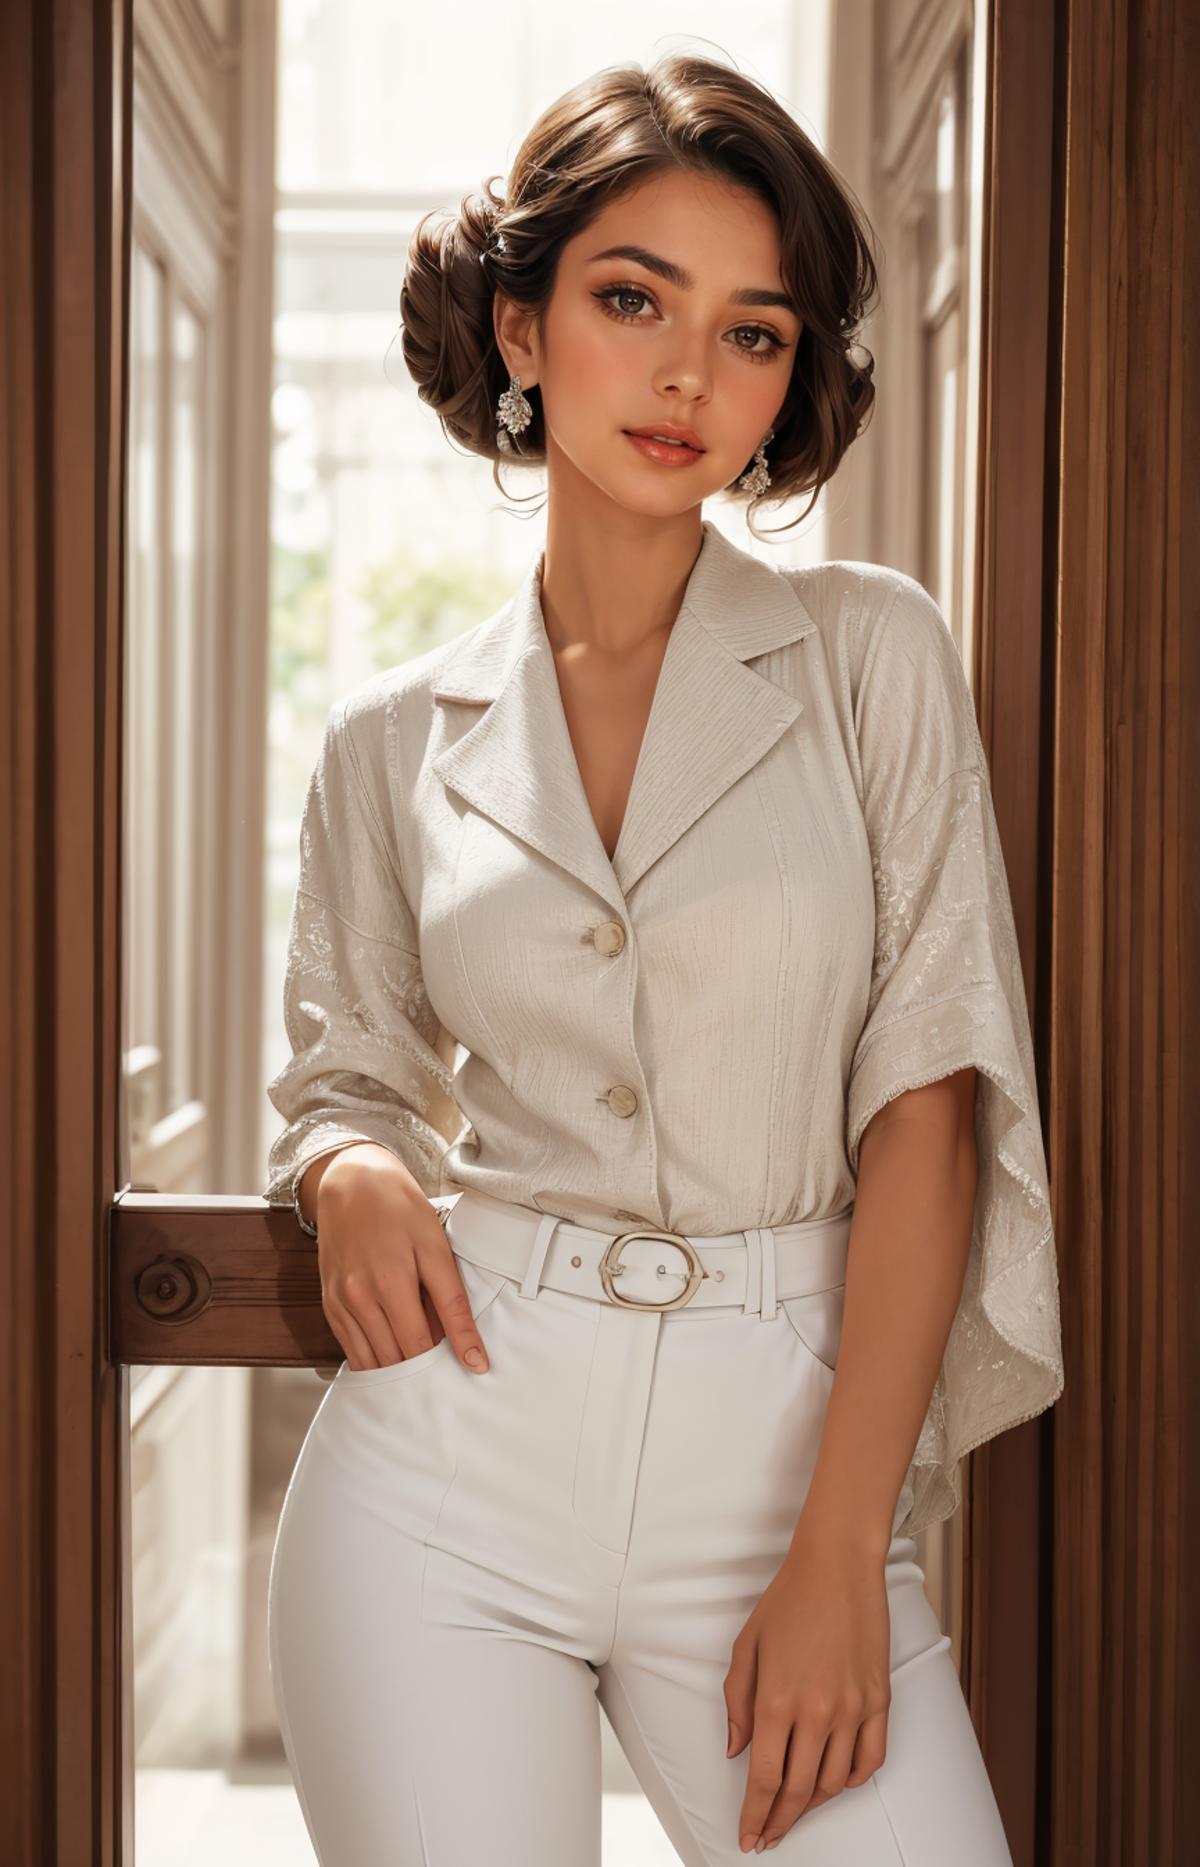 A beautiful young woman wearing a white suit and white pants, with her hands on her hips.